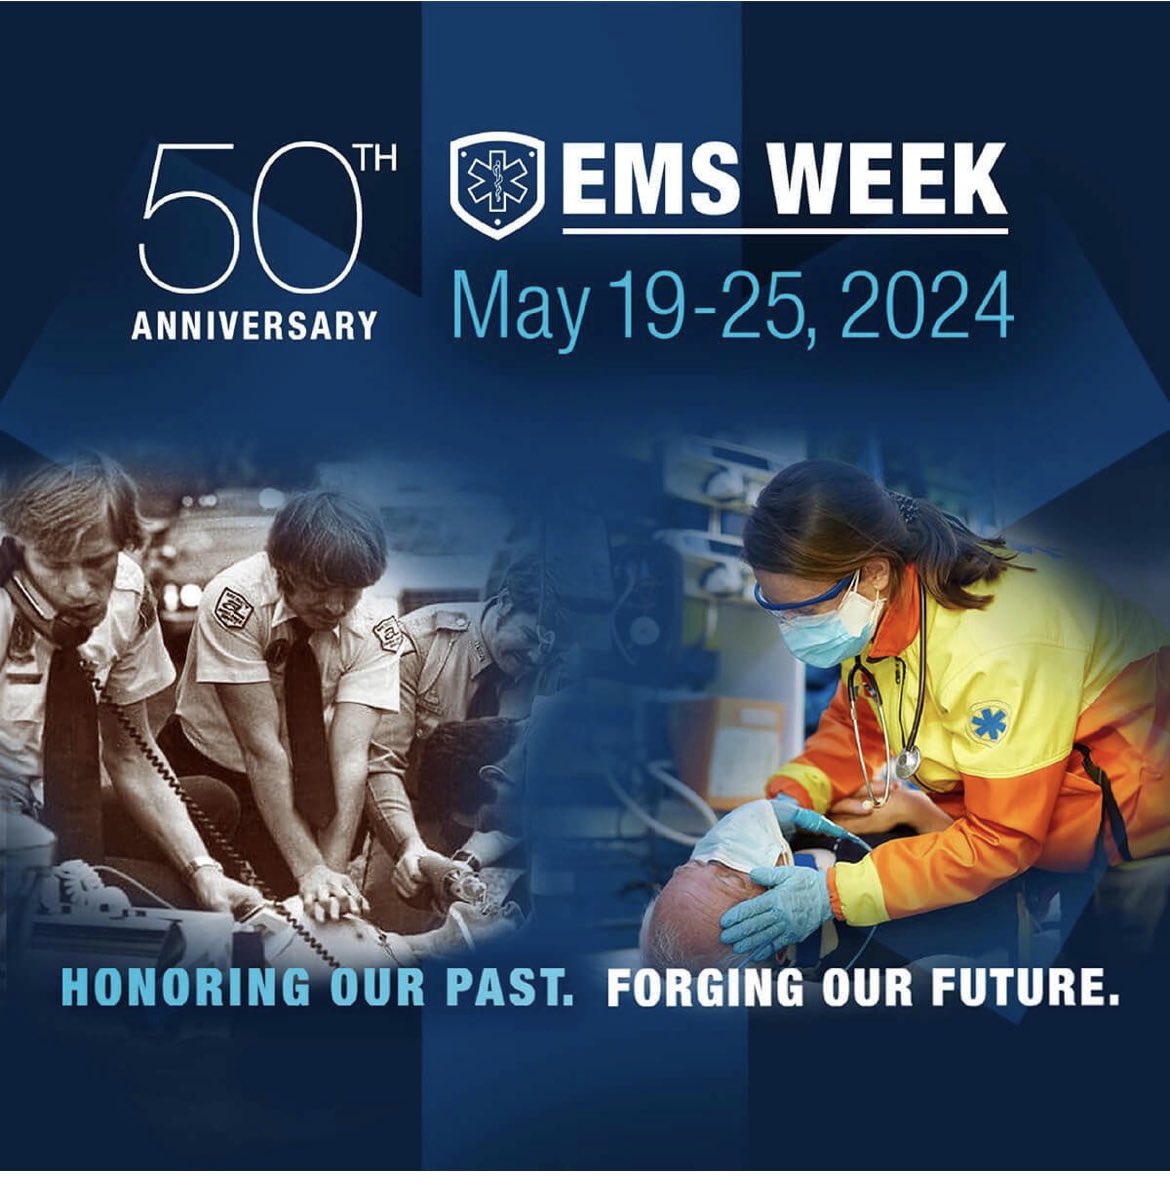 👏to all of our @LifeScanSaves fire based EMS partners during this #EMSWeek 50 years strong 💪! @ACEPNow @fireengineering @IAFFofficial @IAFCEMS @NAEMT_ @PIOMarkBrady @ChiefRubin @Chief600KJ @RealBritaHorn @FireChiefT @ChiefGaryLudwig @jemsconnect @Jefffire89 @5AlarmTaskForce